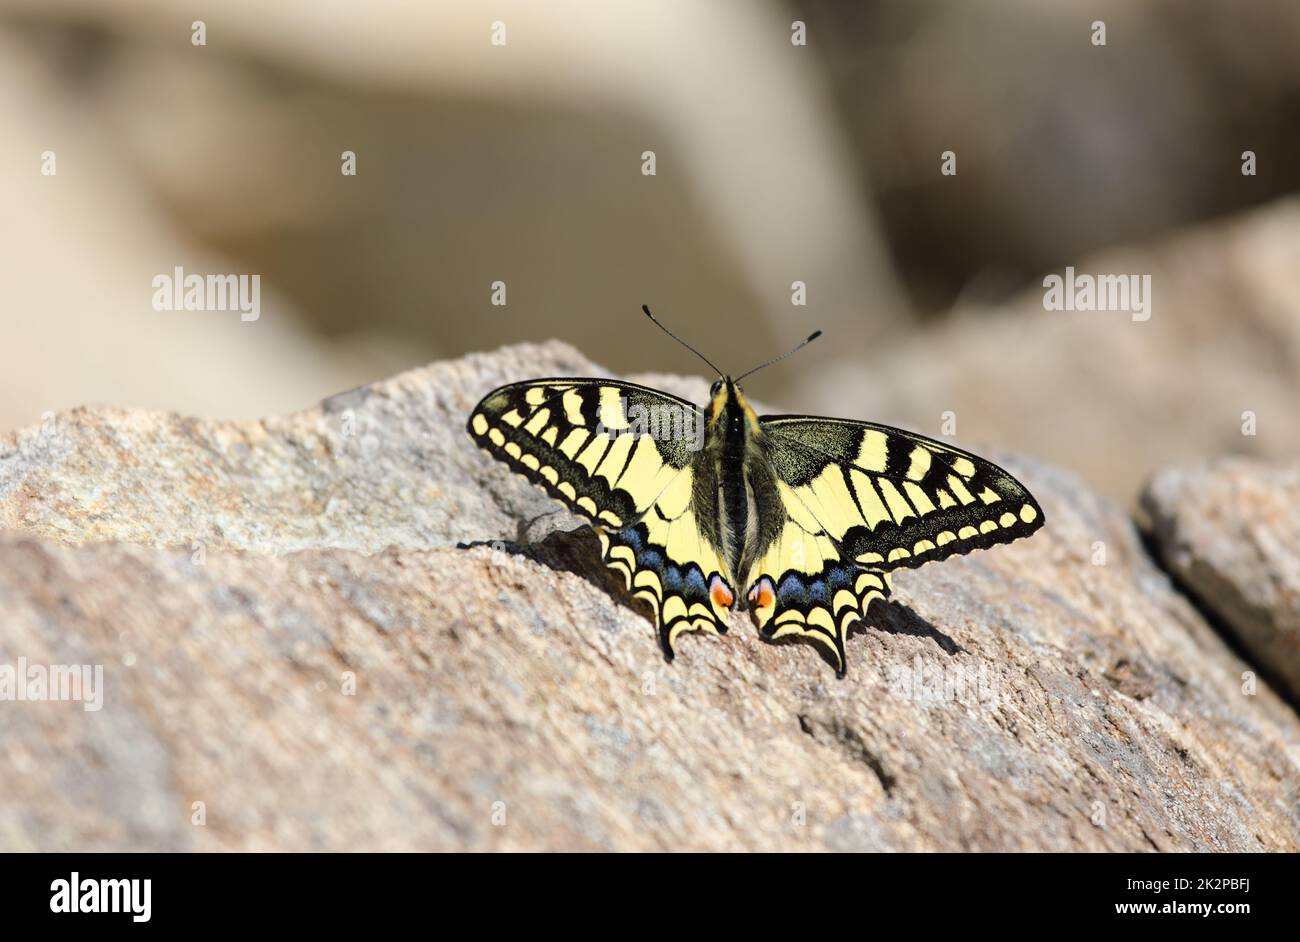 An Old World swallowtail butterfly - Papilio machaon, Papilionidae - resting on a stone on top of a mountain in the Switzerland Alps Stock Photo